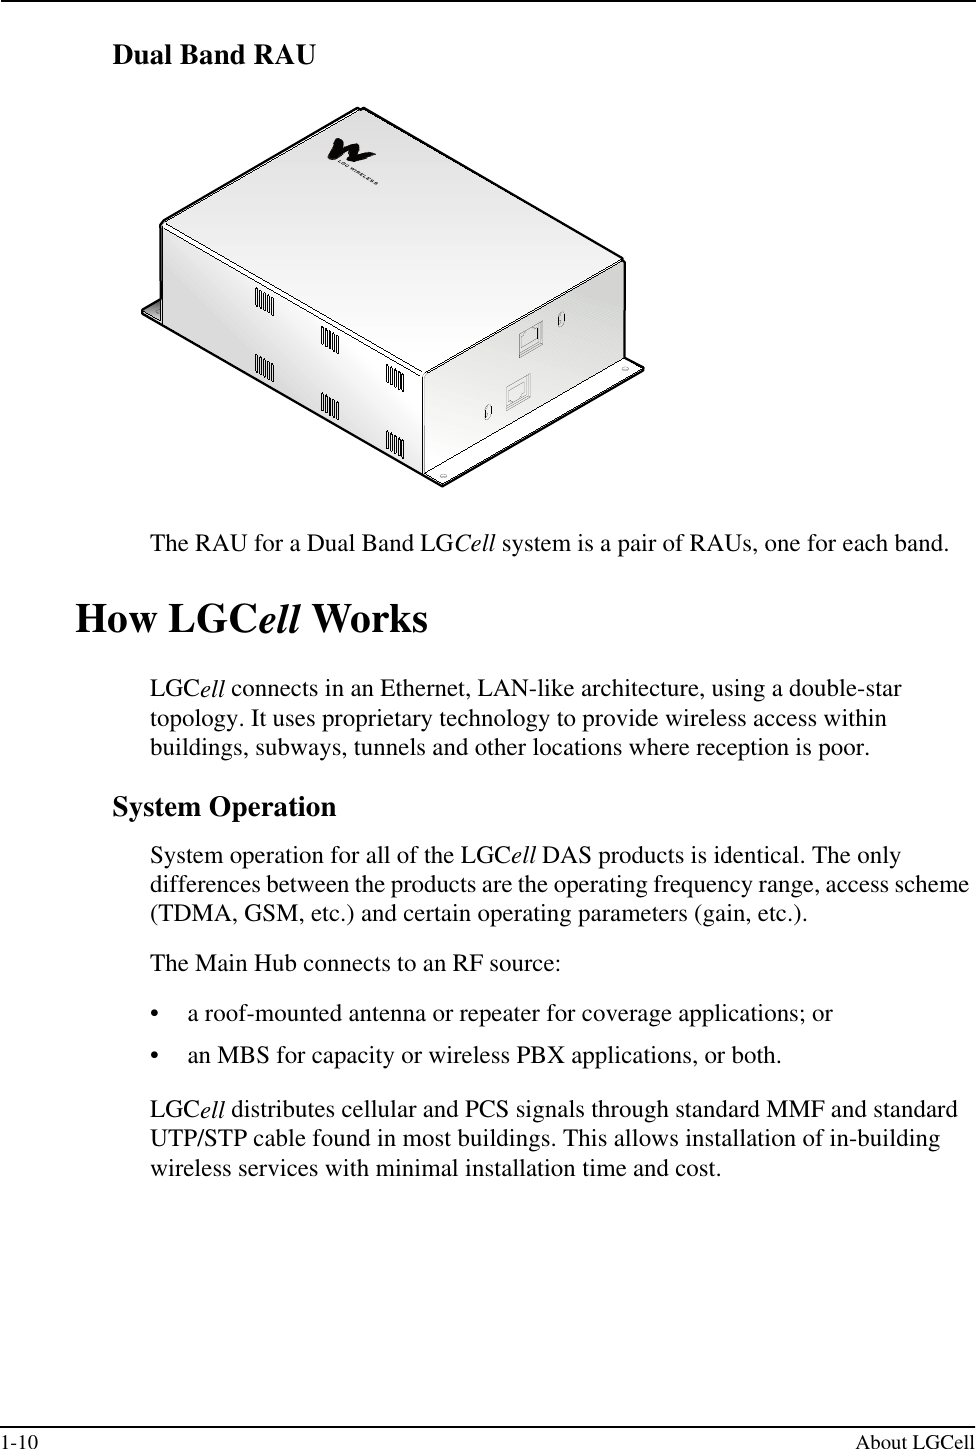 1-10 About LGCellDual Band RAUThe RAU for a Dual Band LGCell system is a pair of RAUs, one for each band.How LGCell WorksLGCell connects in an Ethernet, LAN-like architecture, using a double-star topology. It uses proprietary technology to provide wireless access within buildings, subways, tunnels and other locations where reception is poor.System OperationSystem operation for all of the LGCell DAS products is identical. The only differences between the products are the operating frequency range, access scheme (TDMA, GSM, etc.) and certain operating parameters (gain, etc.). The Main Hub connects to an RF source:•a roof-mounted antenna or repeater for coverage applications; or•an MBS for capacity or wireless PBX applications, or both.LGCell distributes cellular and PCS signals through standard MMF and standard UTP/STP cable found in most buildings. This allows installation of in-building wireless services with minimal installation time and cost.